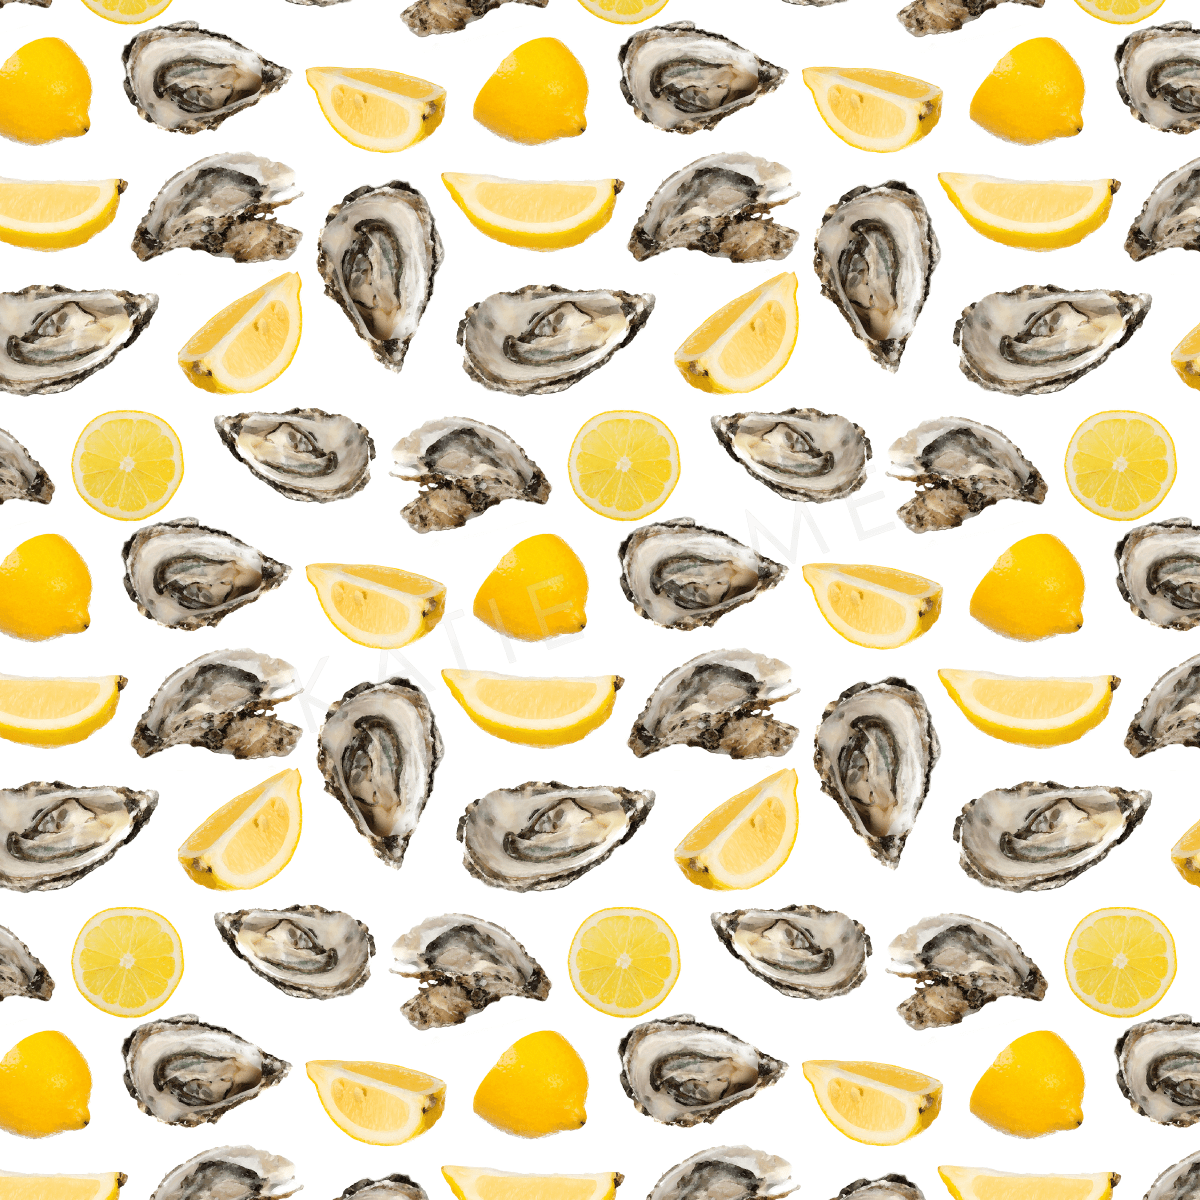 Oyster Images Cartoon 1200x1200